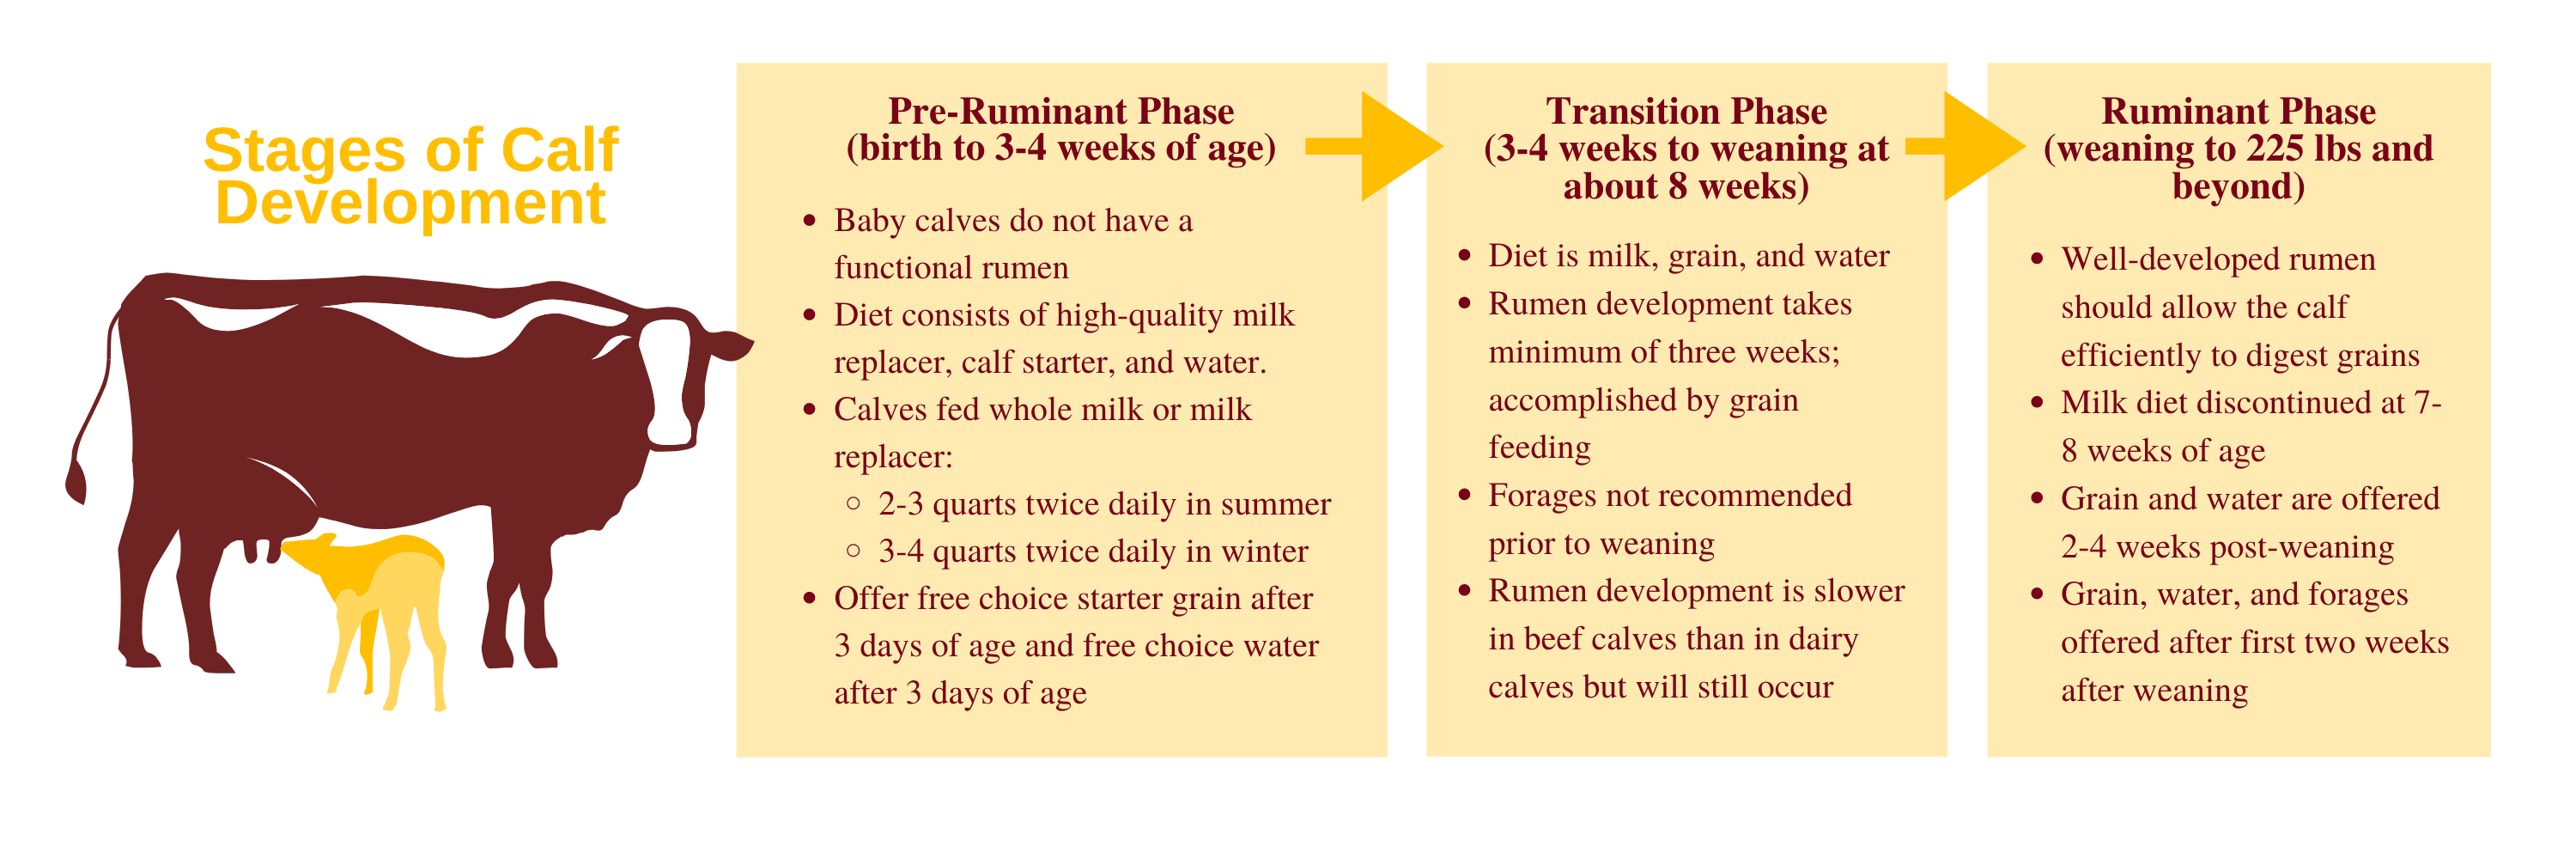 Stages of Calf Development Graphic